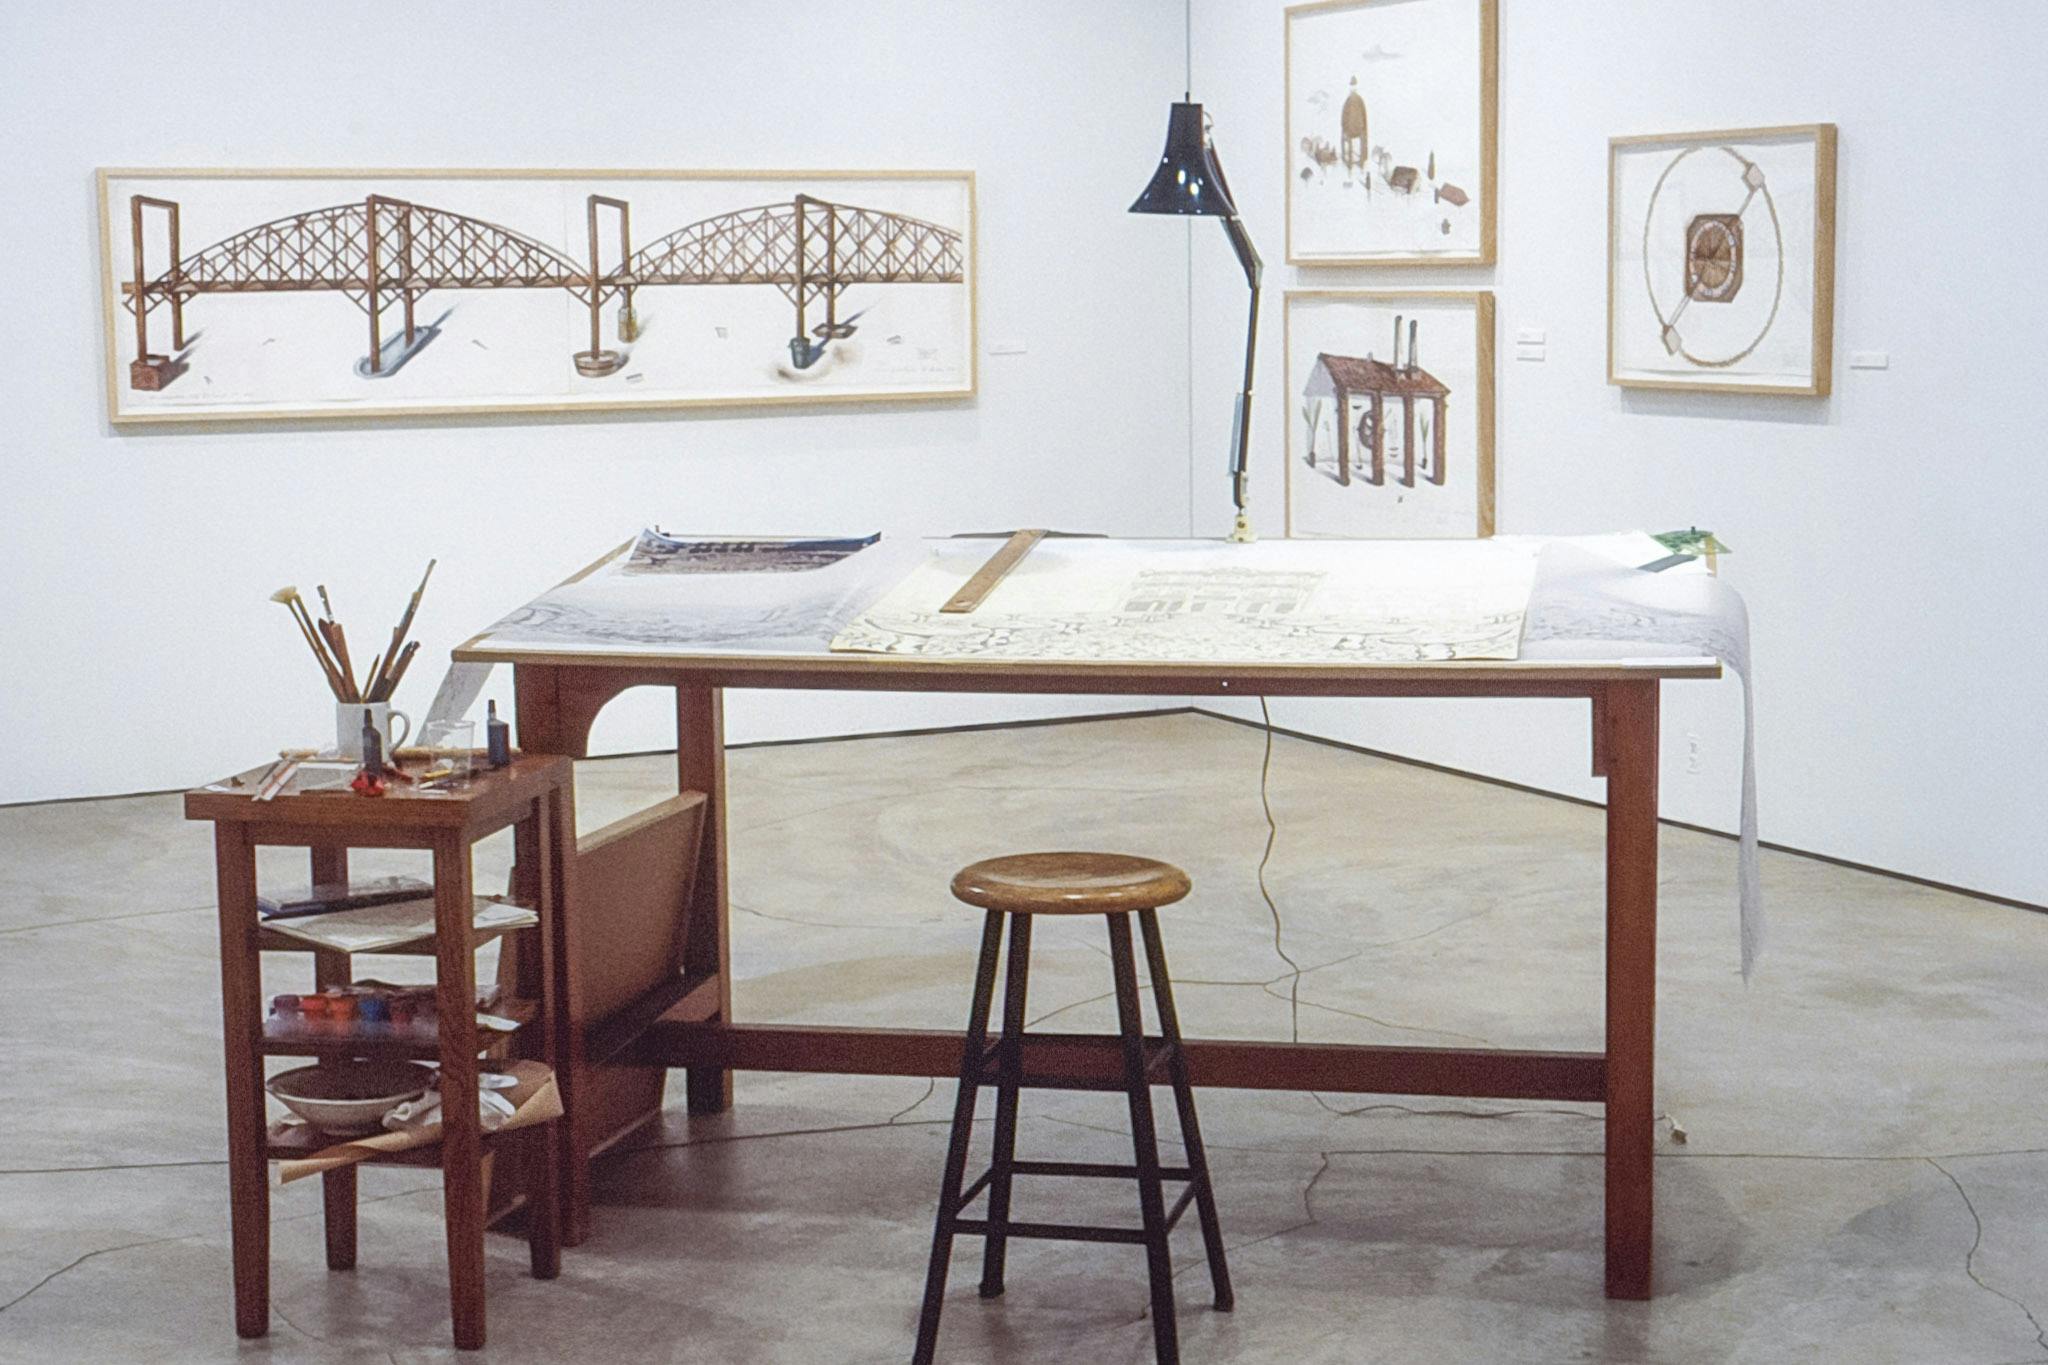 A corner of the gallery resembles the studio space of an architect. Large wooden table with a desk lamp is installed in front of the drawings of buildings and bridges on the walls. 